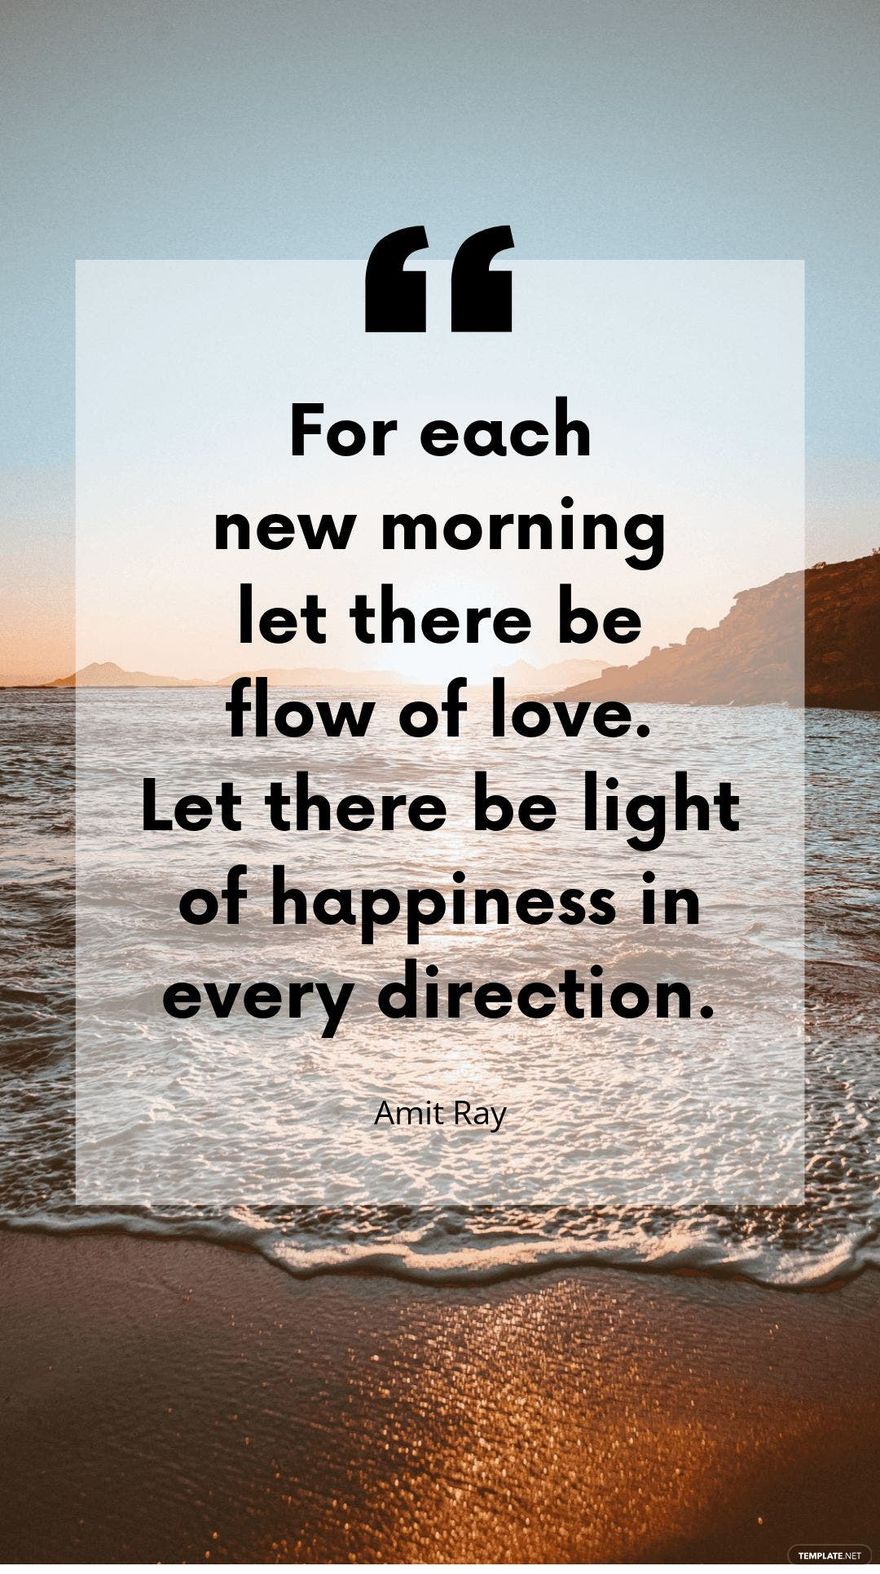 Amit Ray - For each new morning let there be flow of love. Let there be light of happiness in every direction.